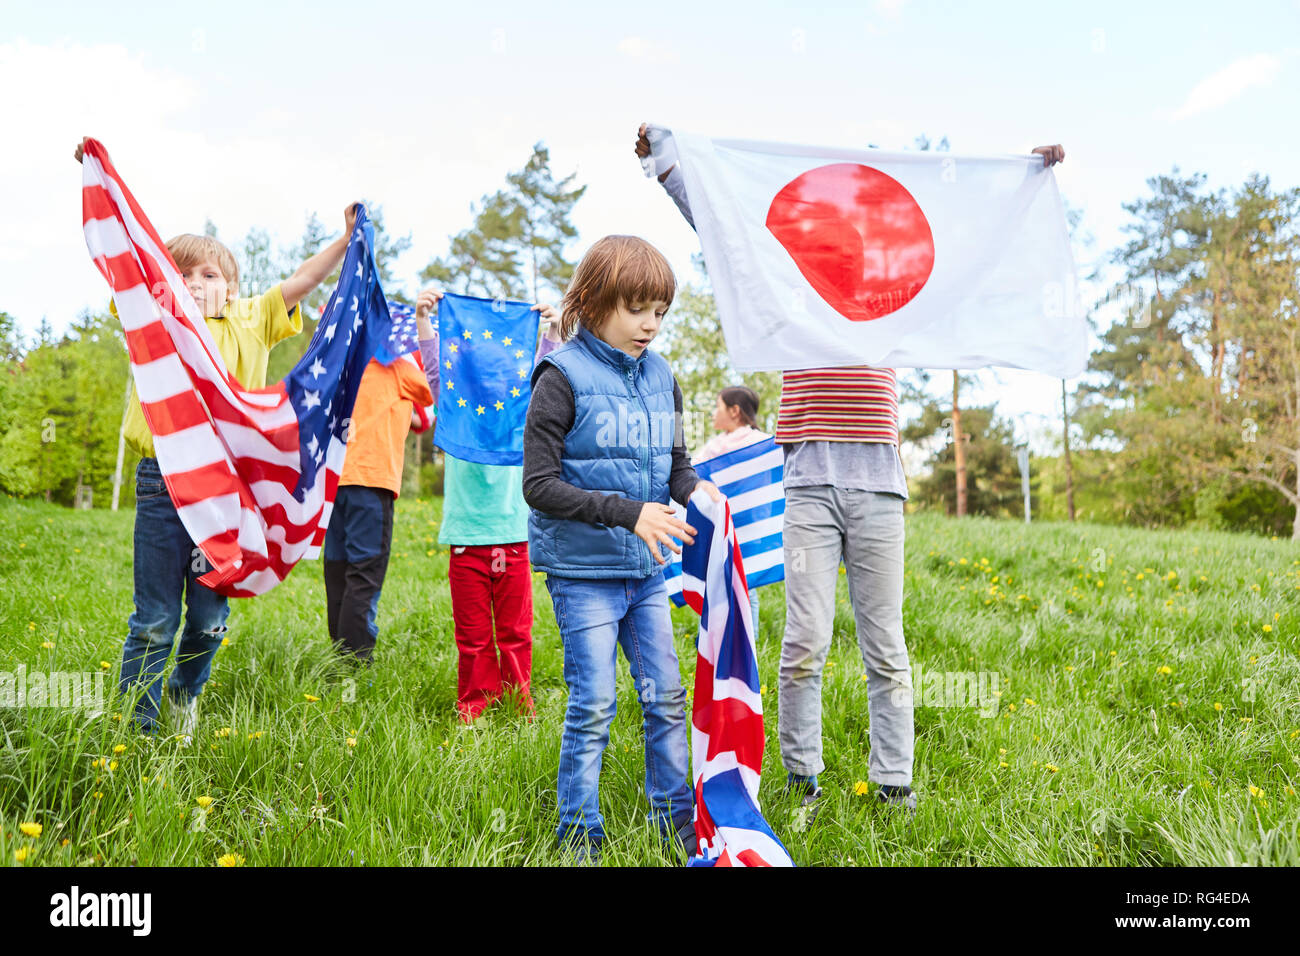 Group of children in international youth camp with different national flags Stock Photo